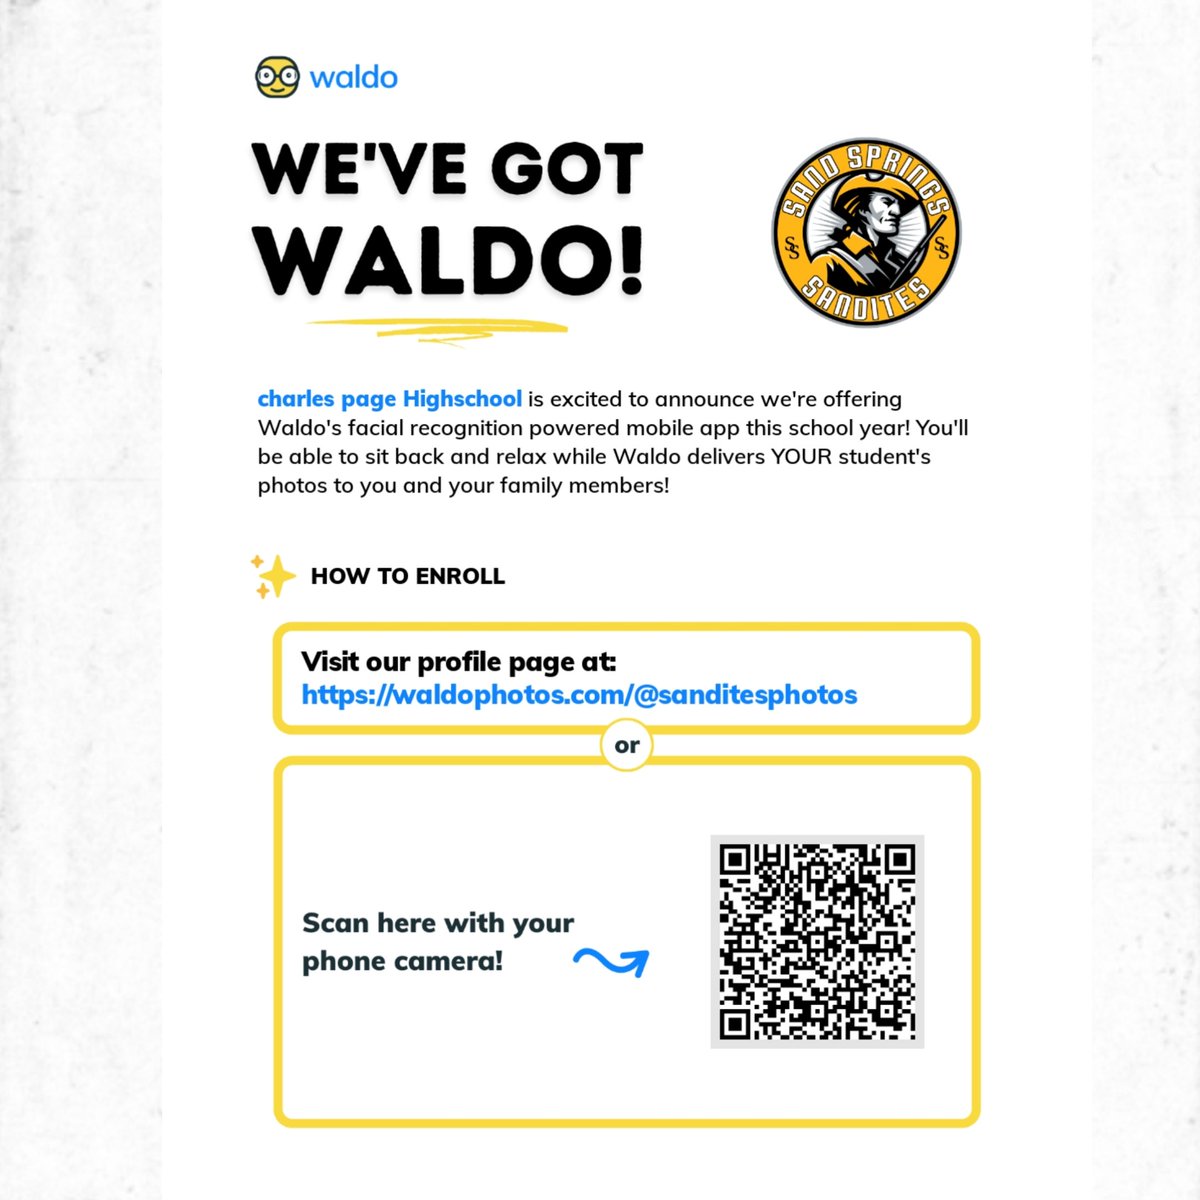 Sign up with Waldo and find pictures of our Sandite Athlete's in Action!